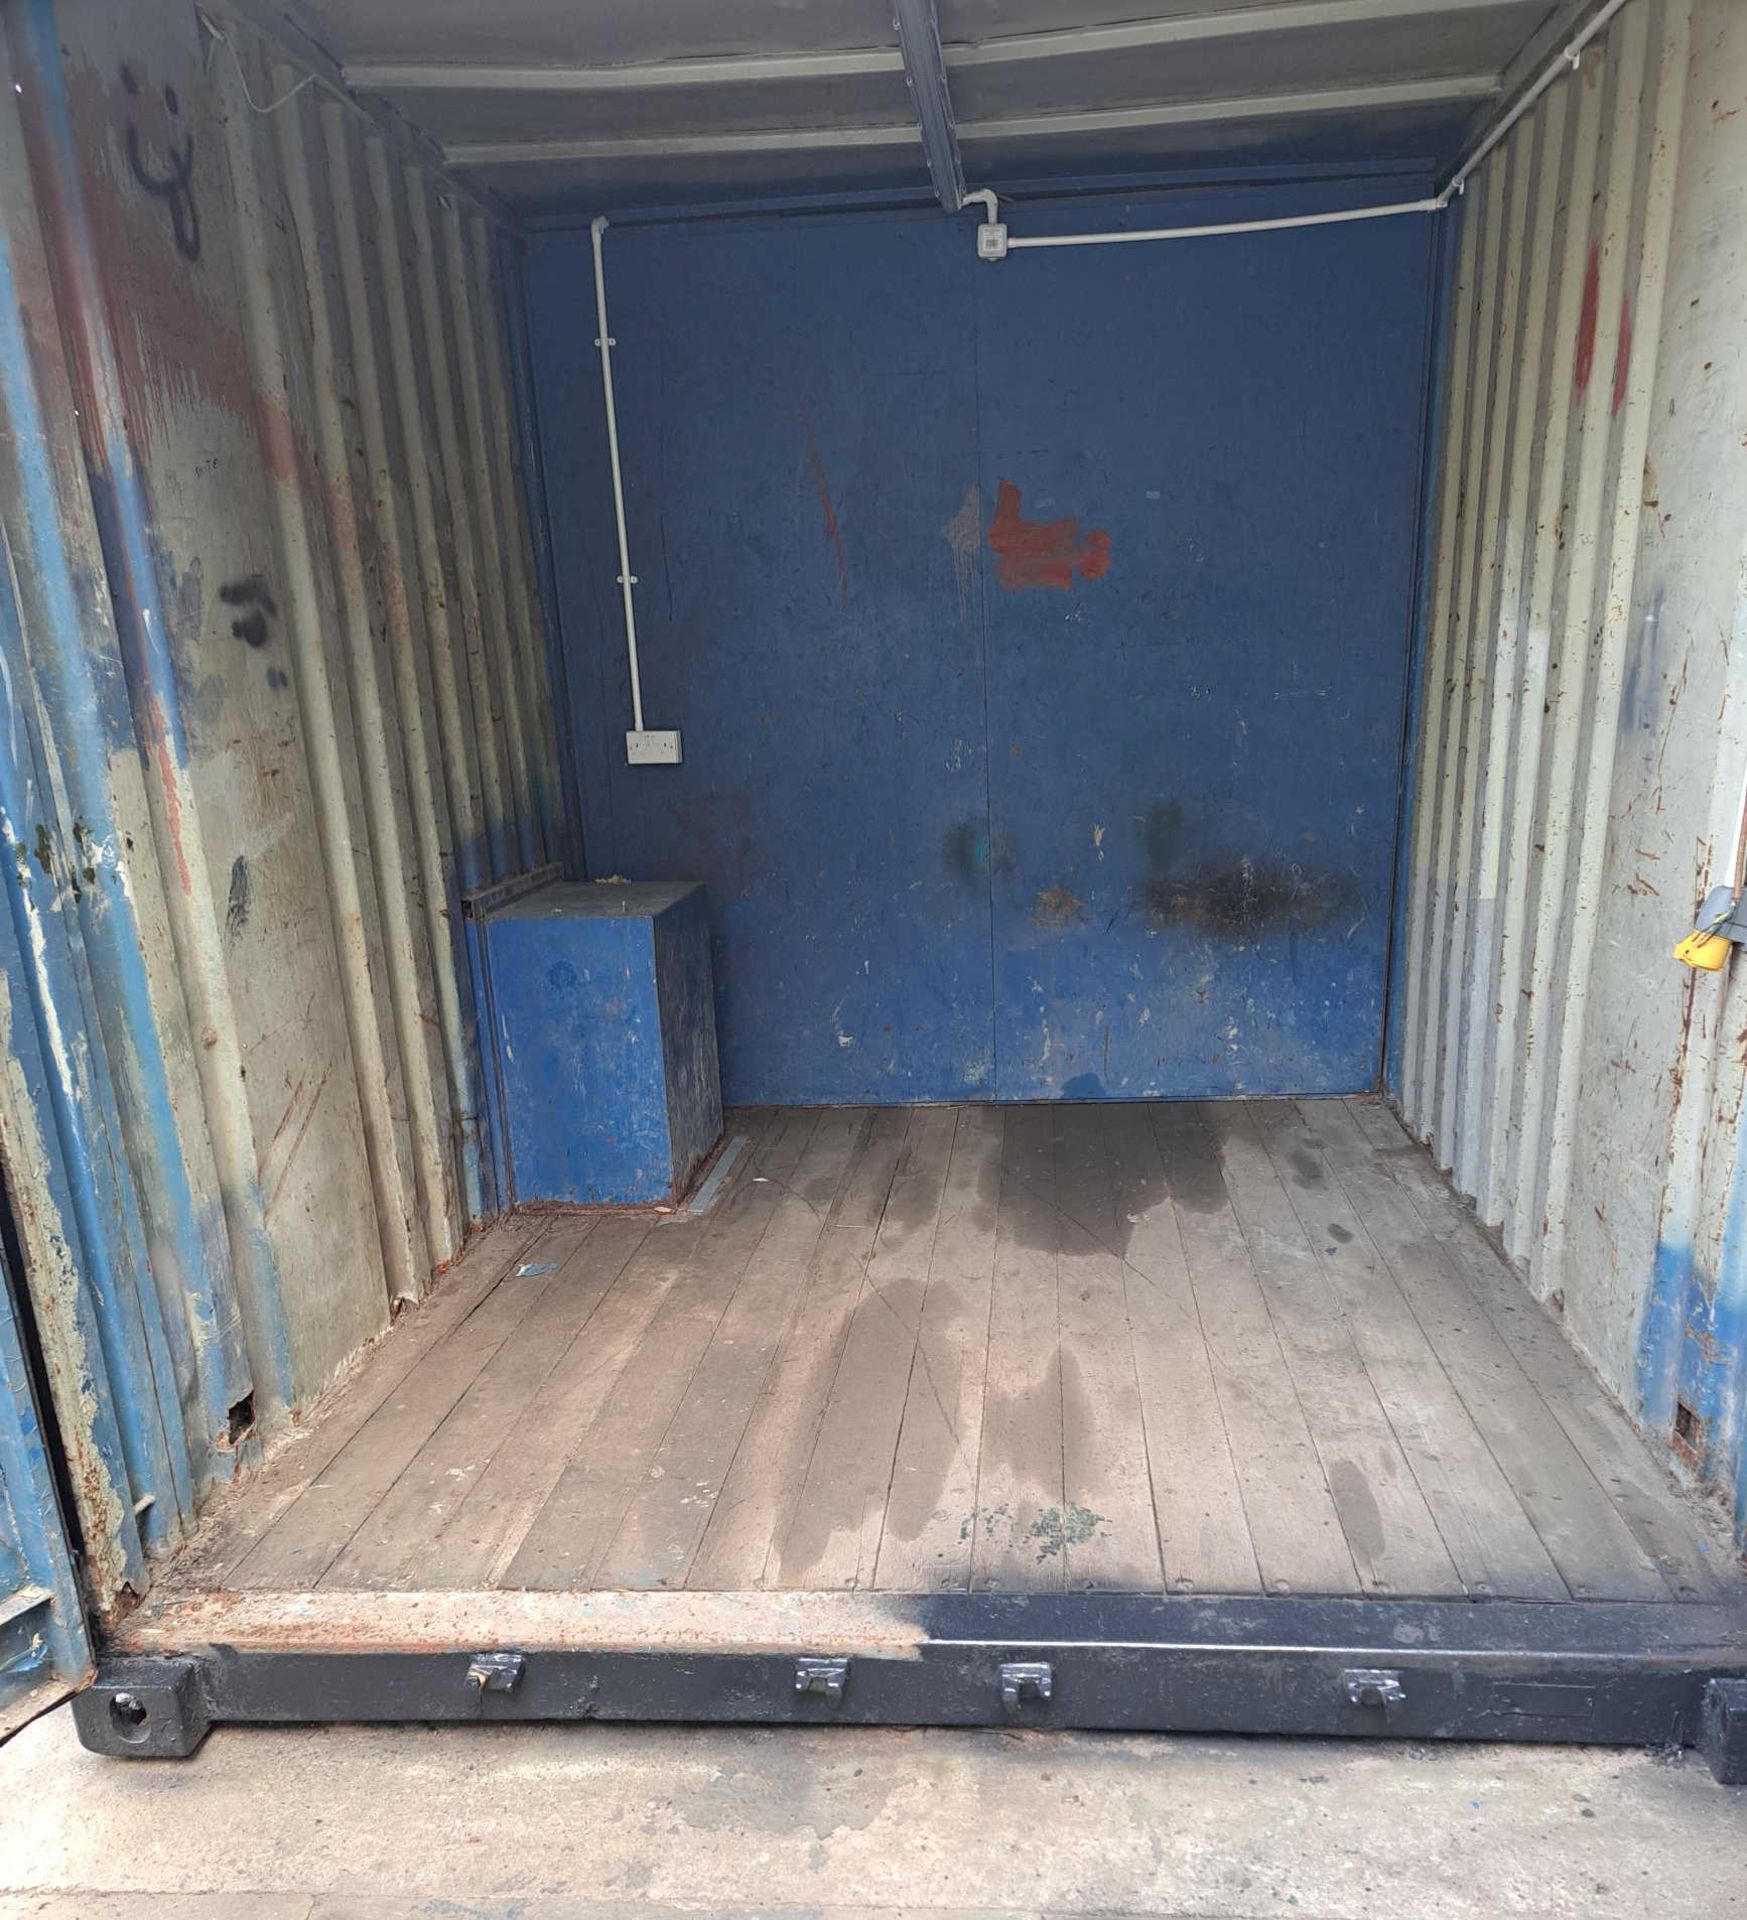 20'0" X 10'0" Lockable Steel Container - Ref: 76 - CL464 - Location: Liverpool L19 - Image 6 of 8